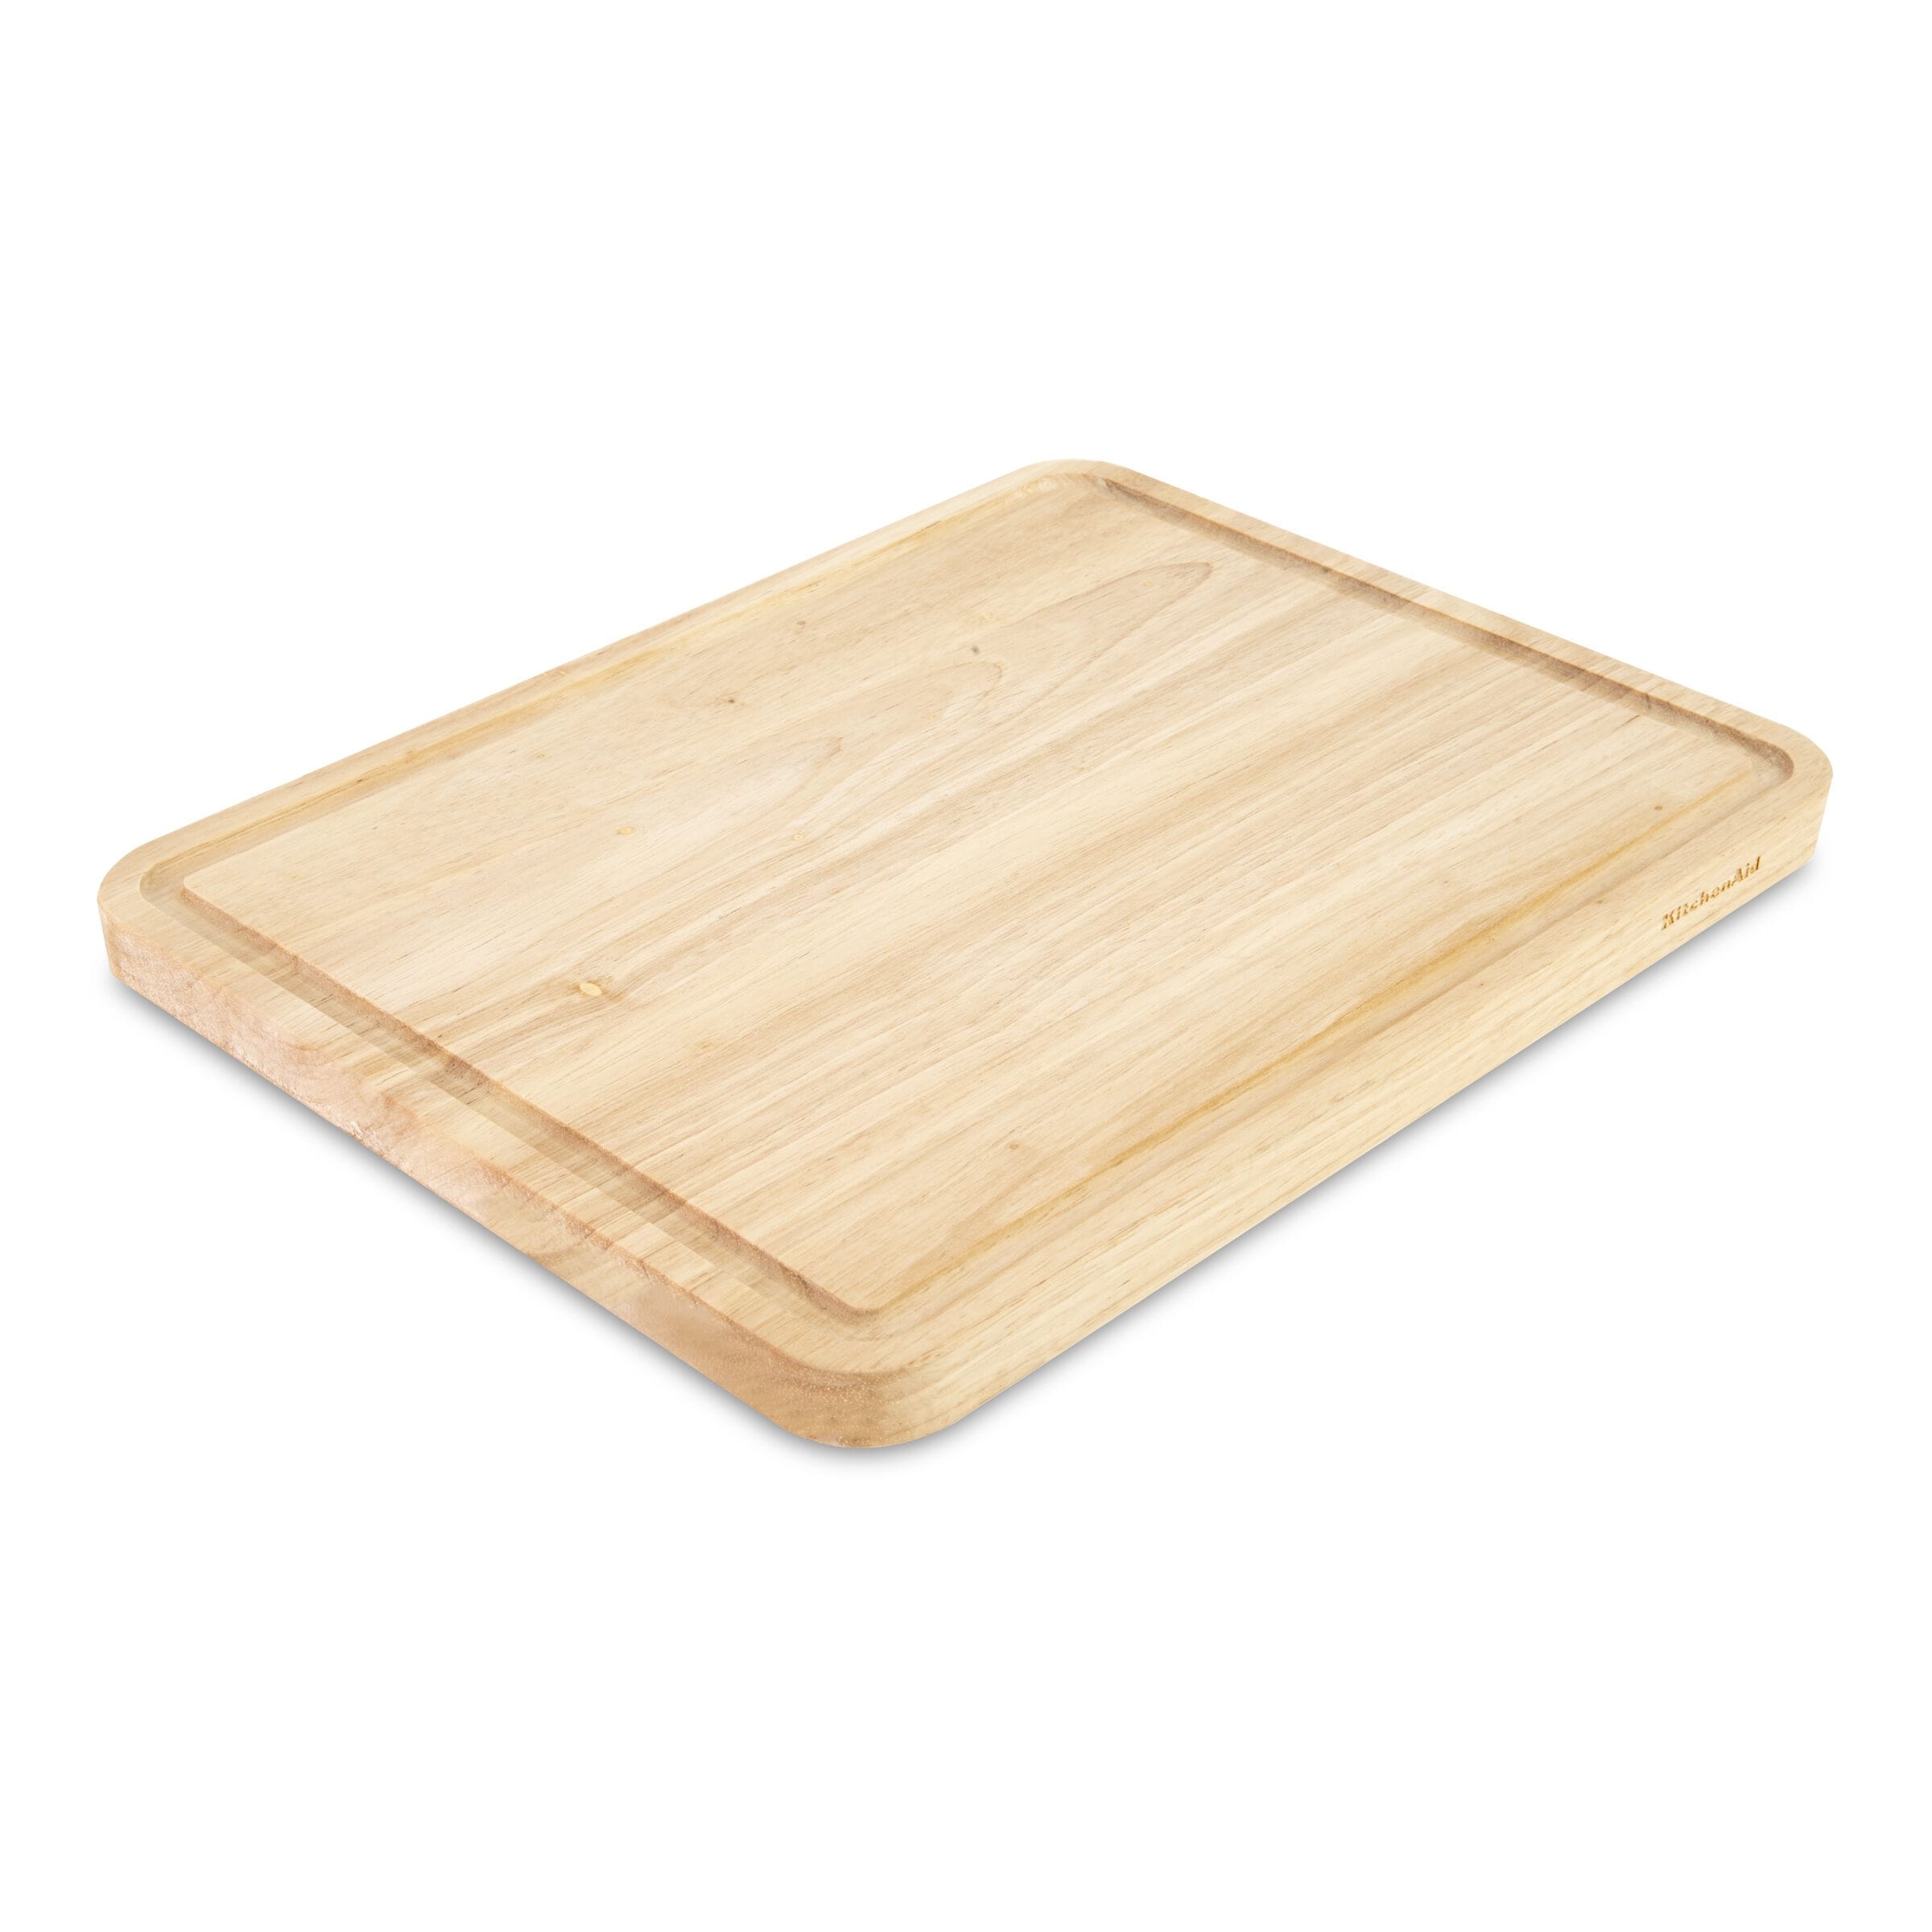 https://ak1.ostkcdn.com/images/products/is/images/direct/88796cdbe02f4cffb157712a9ac1d38de7376455/KitchenAid-Classic-Wood-Cutting-Board%2C-11x14-Inch%2C-Natural.jpg